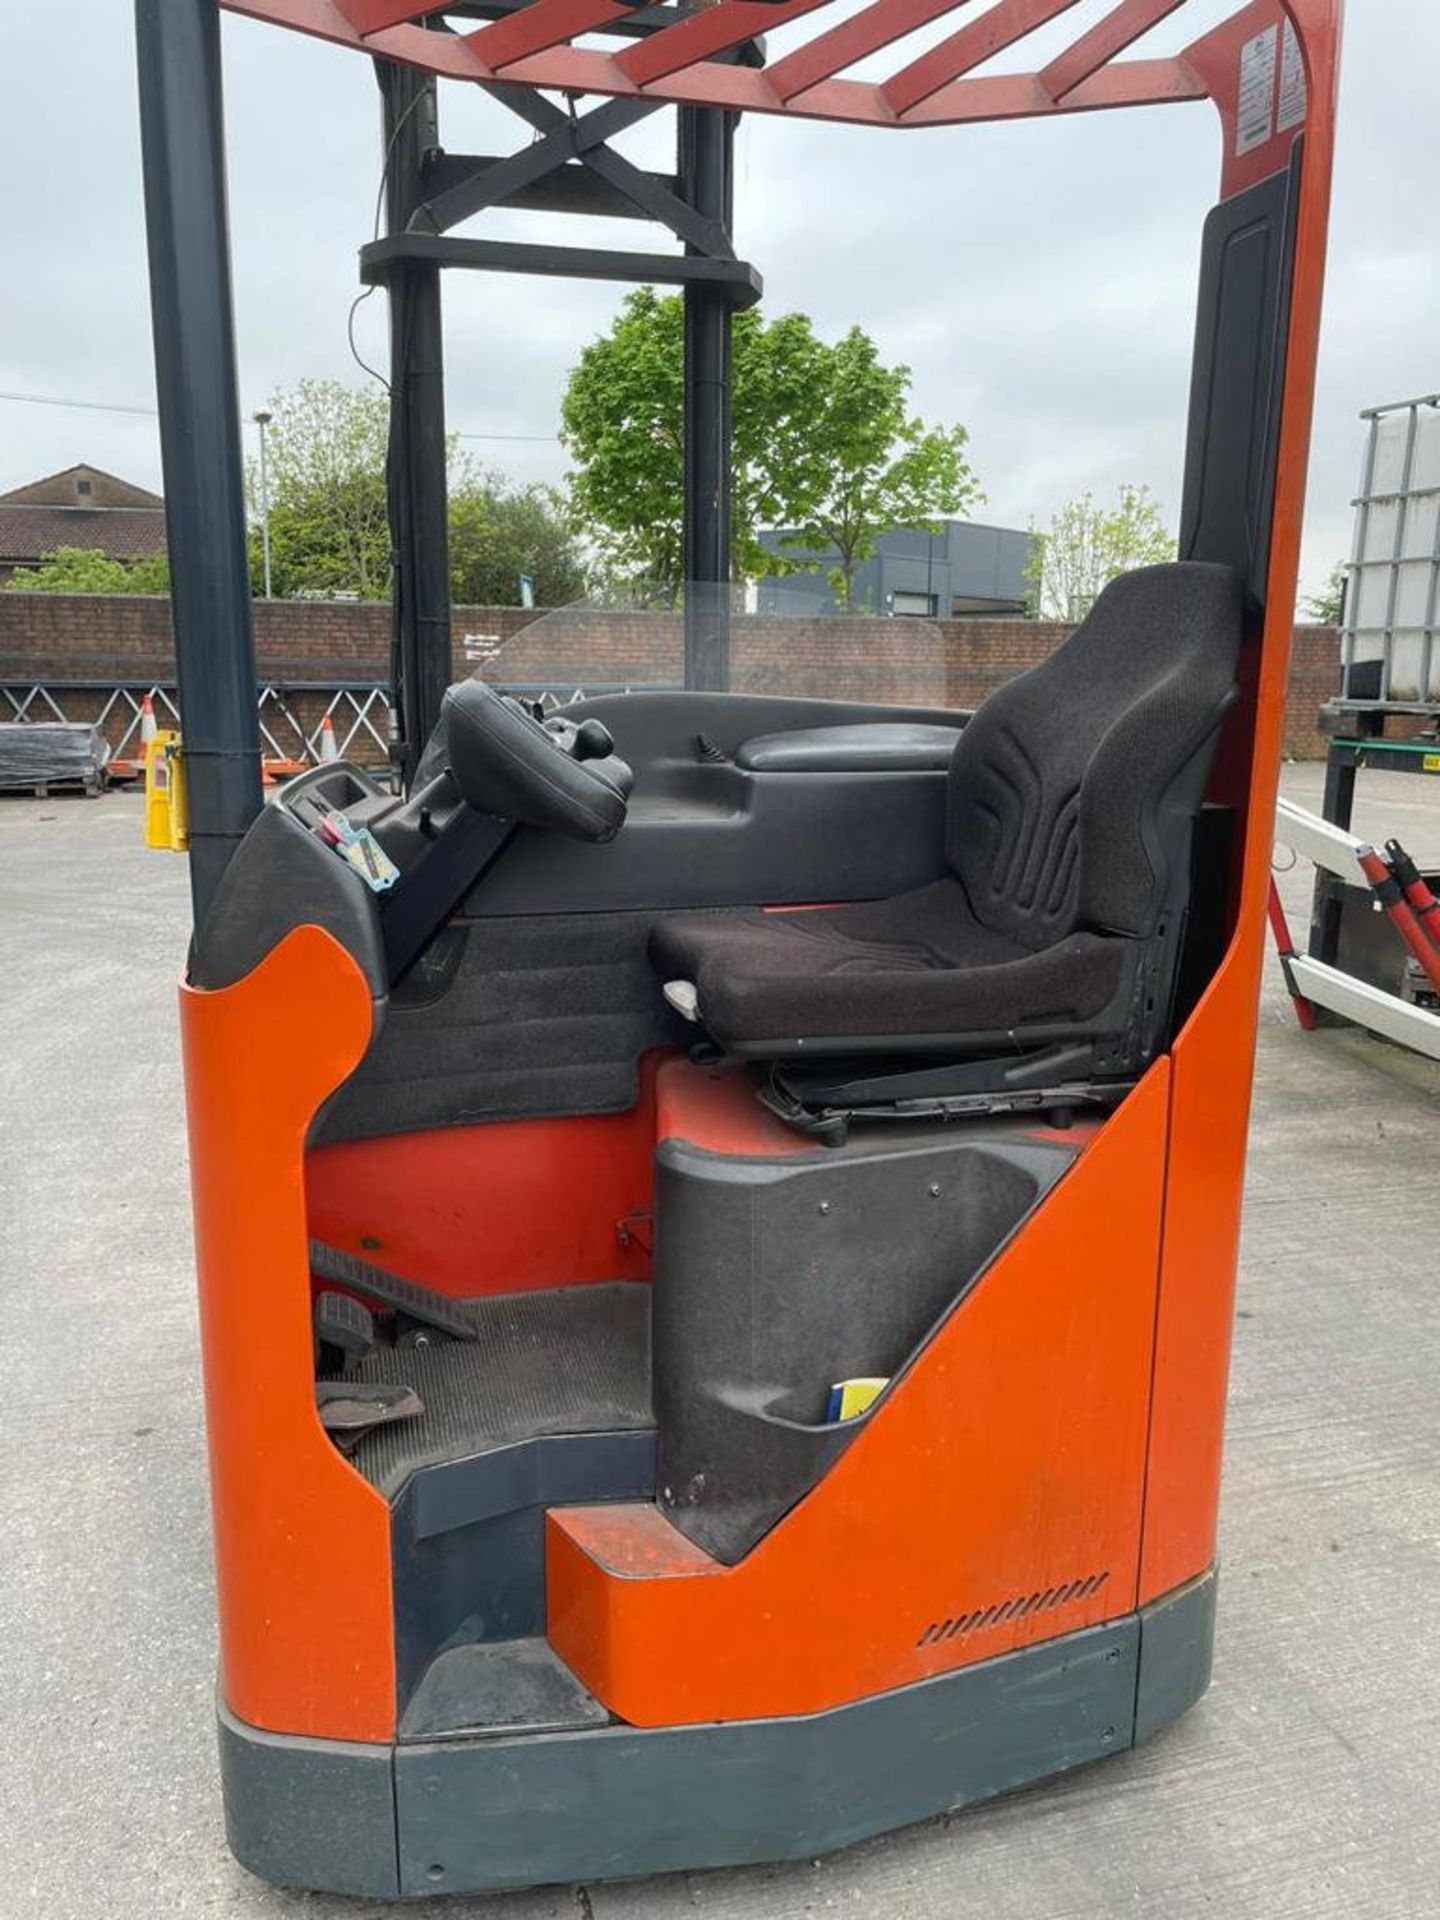 1 x BT RRB1/15 Electric 1.6T Reach Truck With Charger - CL855 - Location: Widnes WA8 - Image 3 of 7